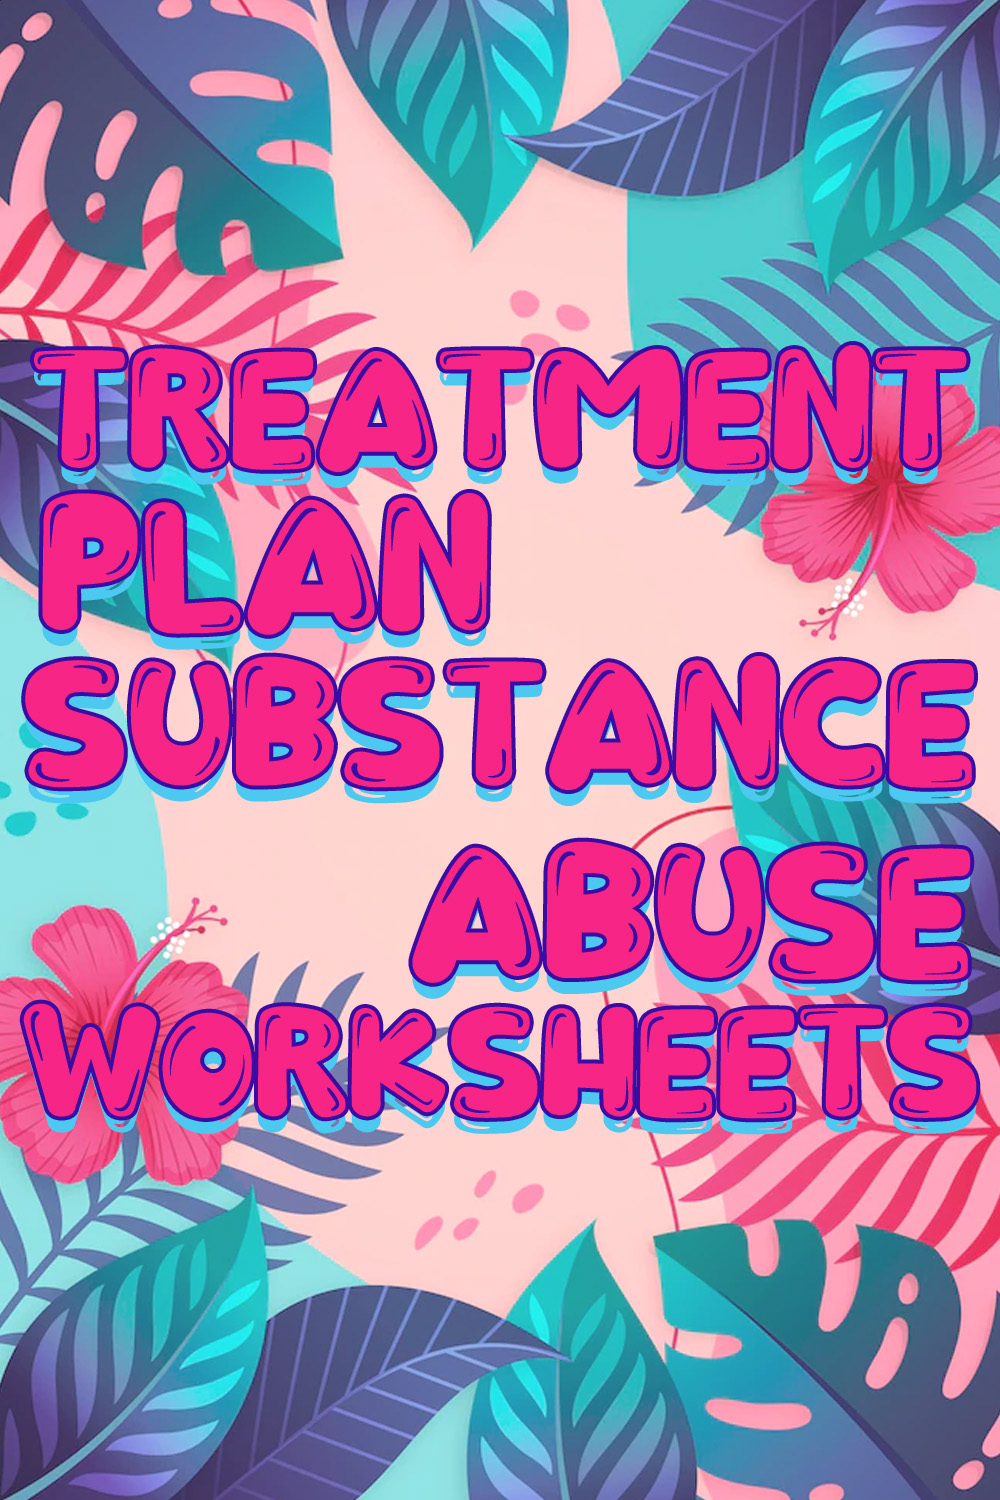 18 Images of Treatment Plan Substance Abuse Worksheets